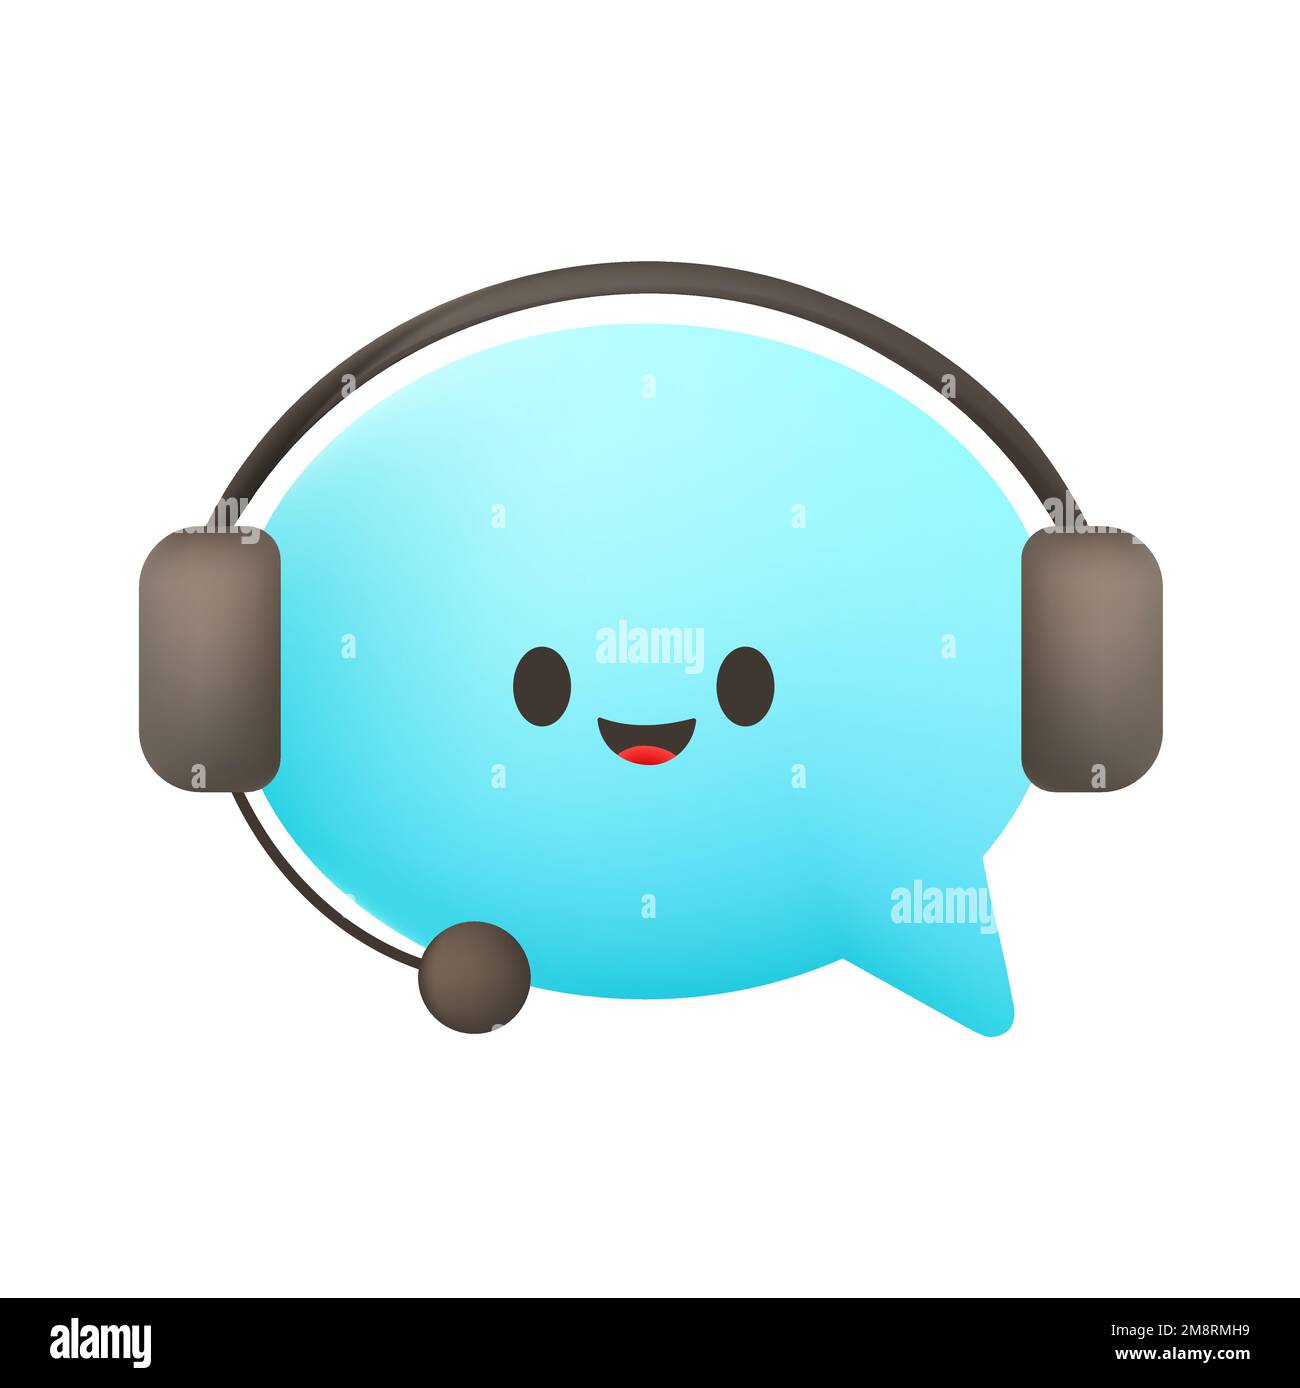 https://c8.alamy.com/comp/2M8RMH9/cute-speech-bubble-with-headphones-and-microphone-vector-flat-cartoon-character-illustration-icon-speech-bubblesupport-concept-2M8RMH9.jpg